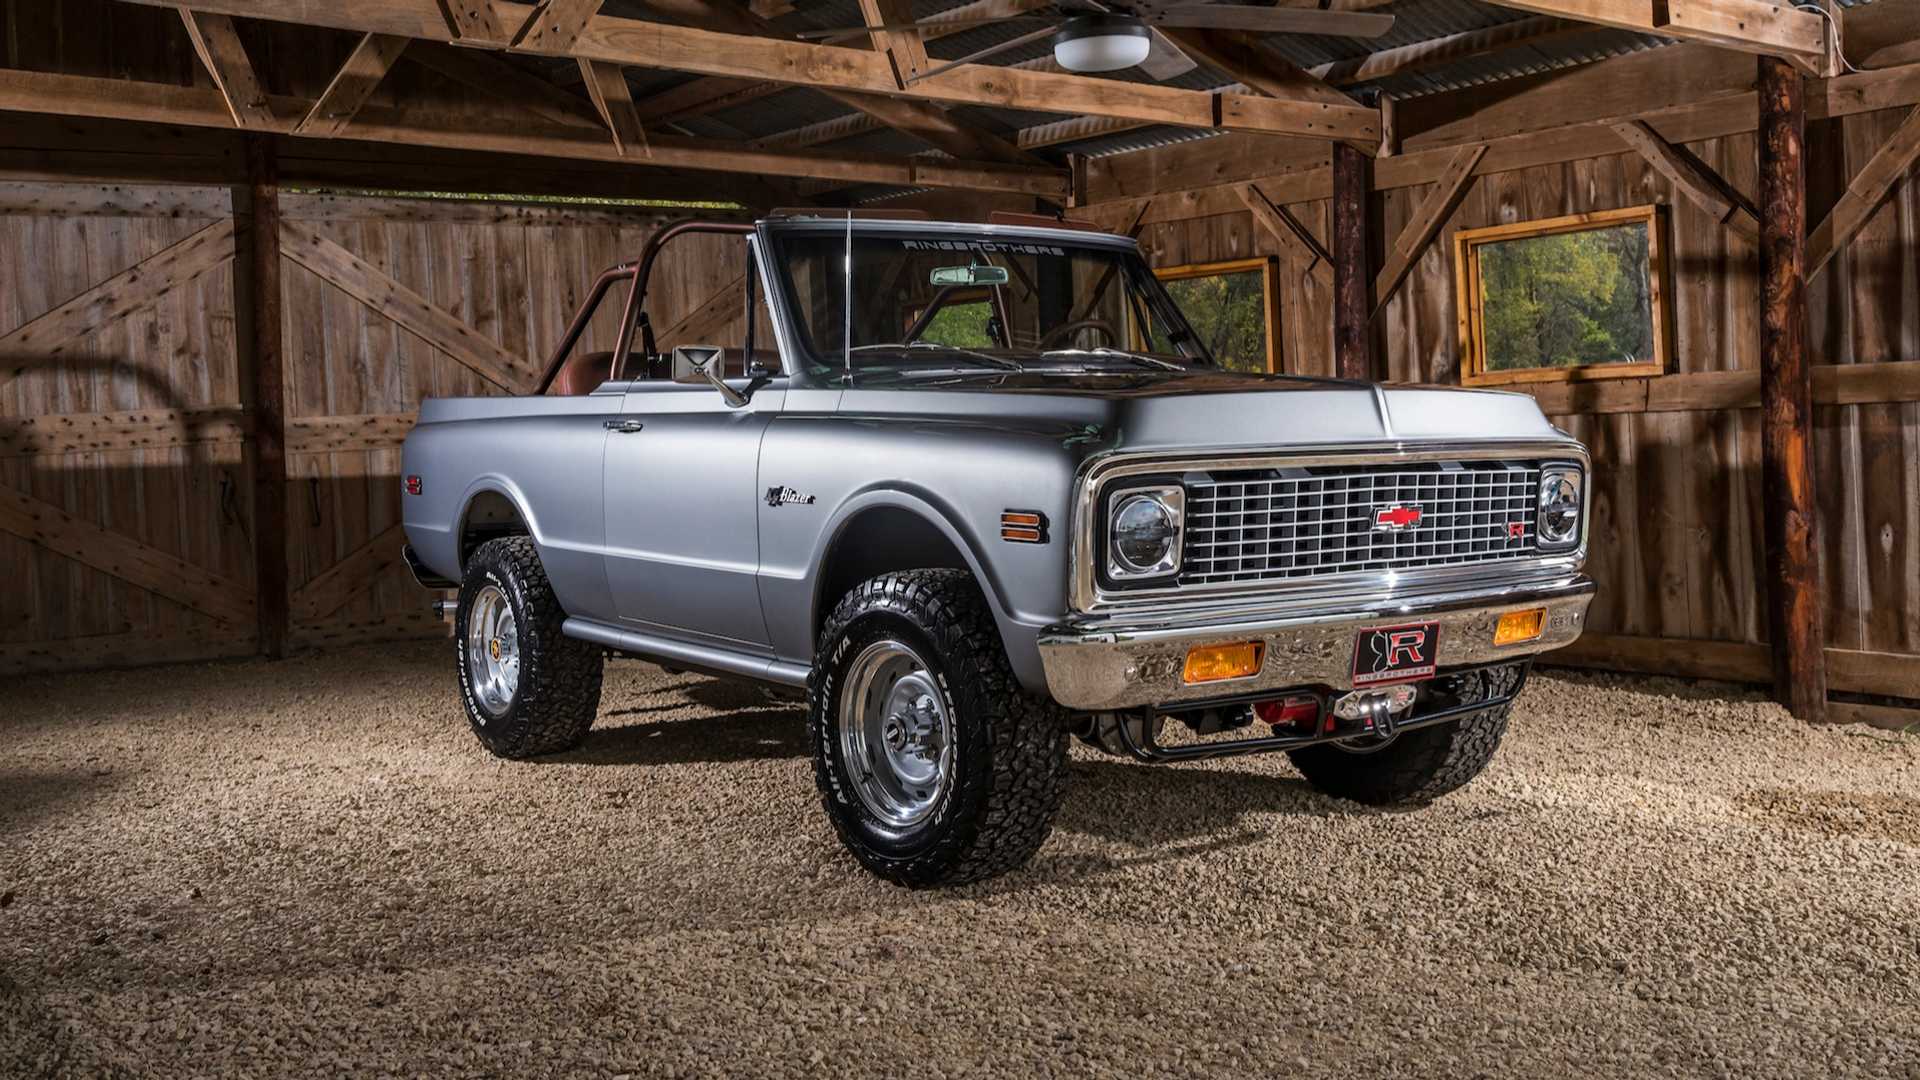 K5 Chevy Blazer Restomod By Ringbrothers Picture, Photo